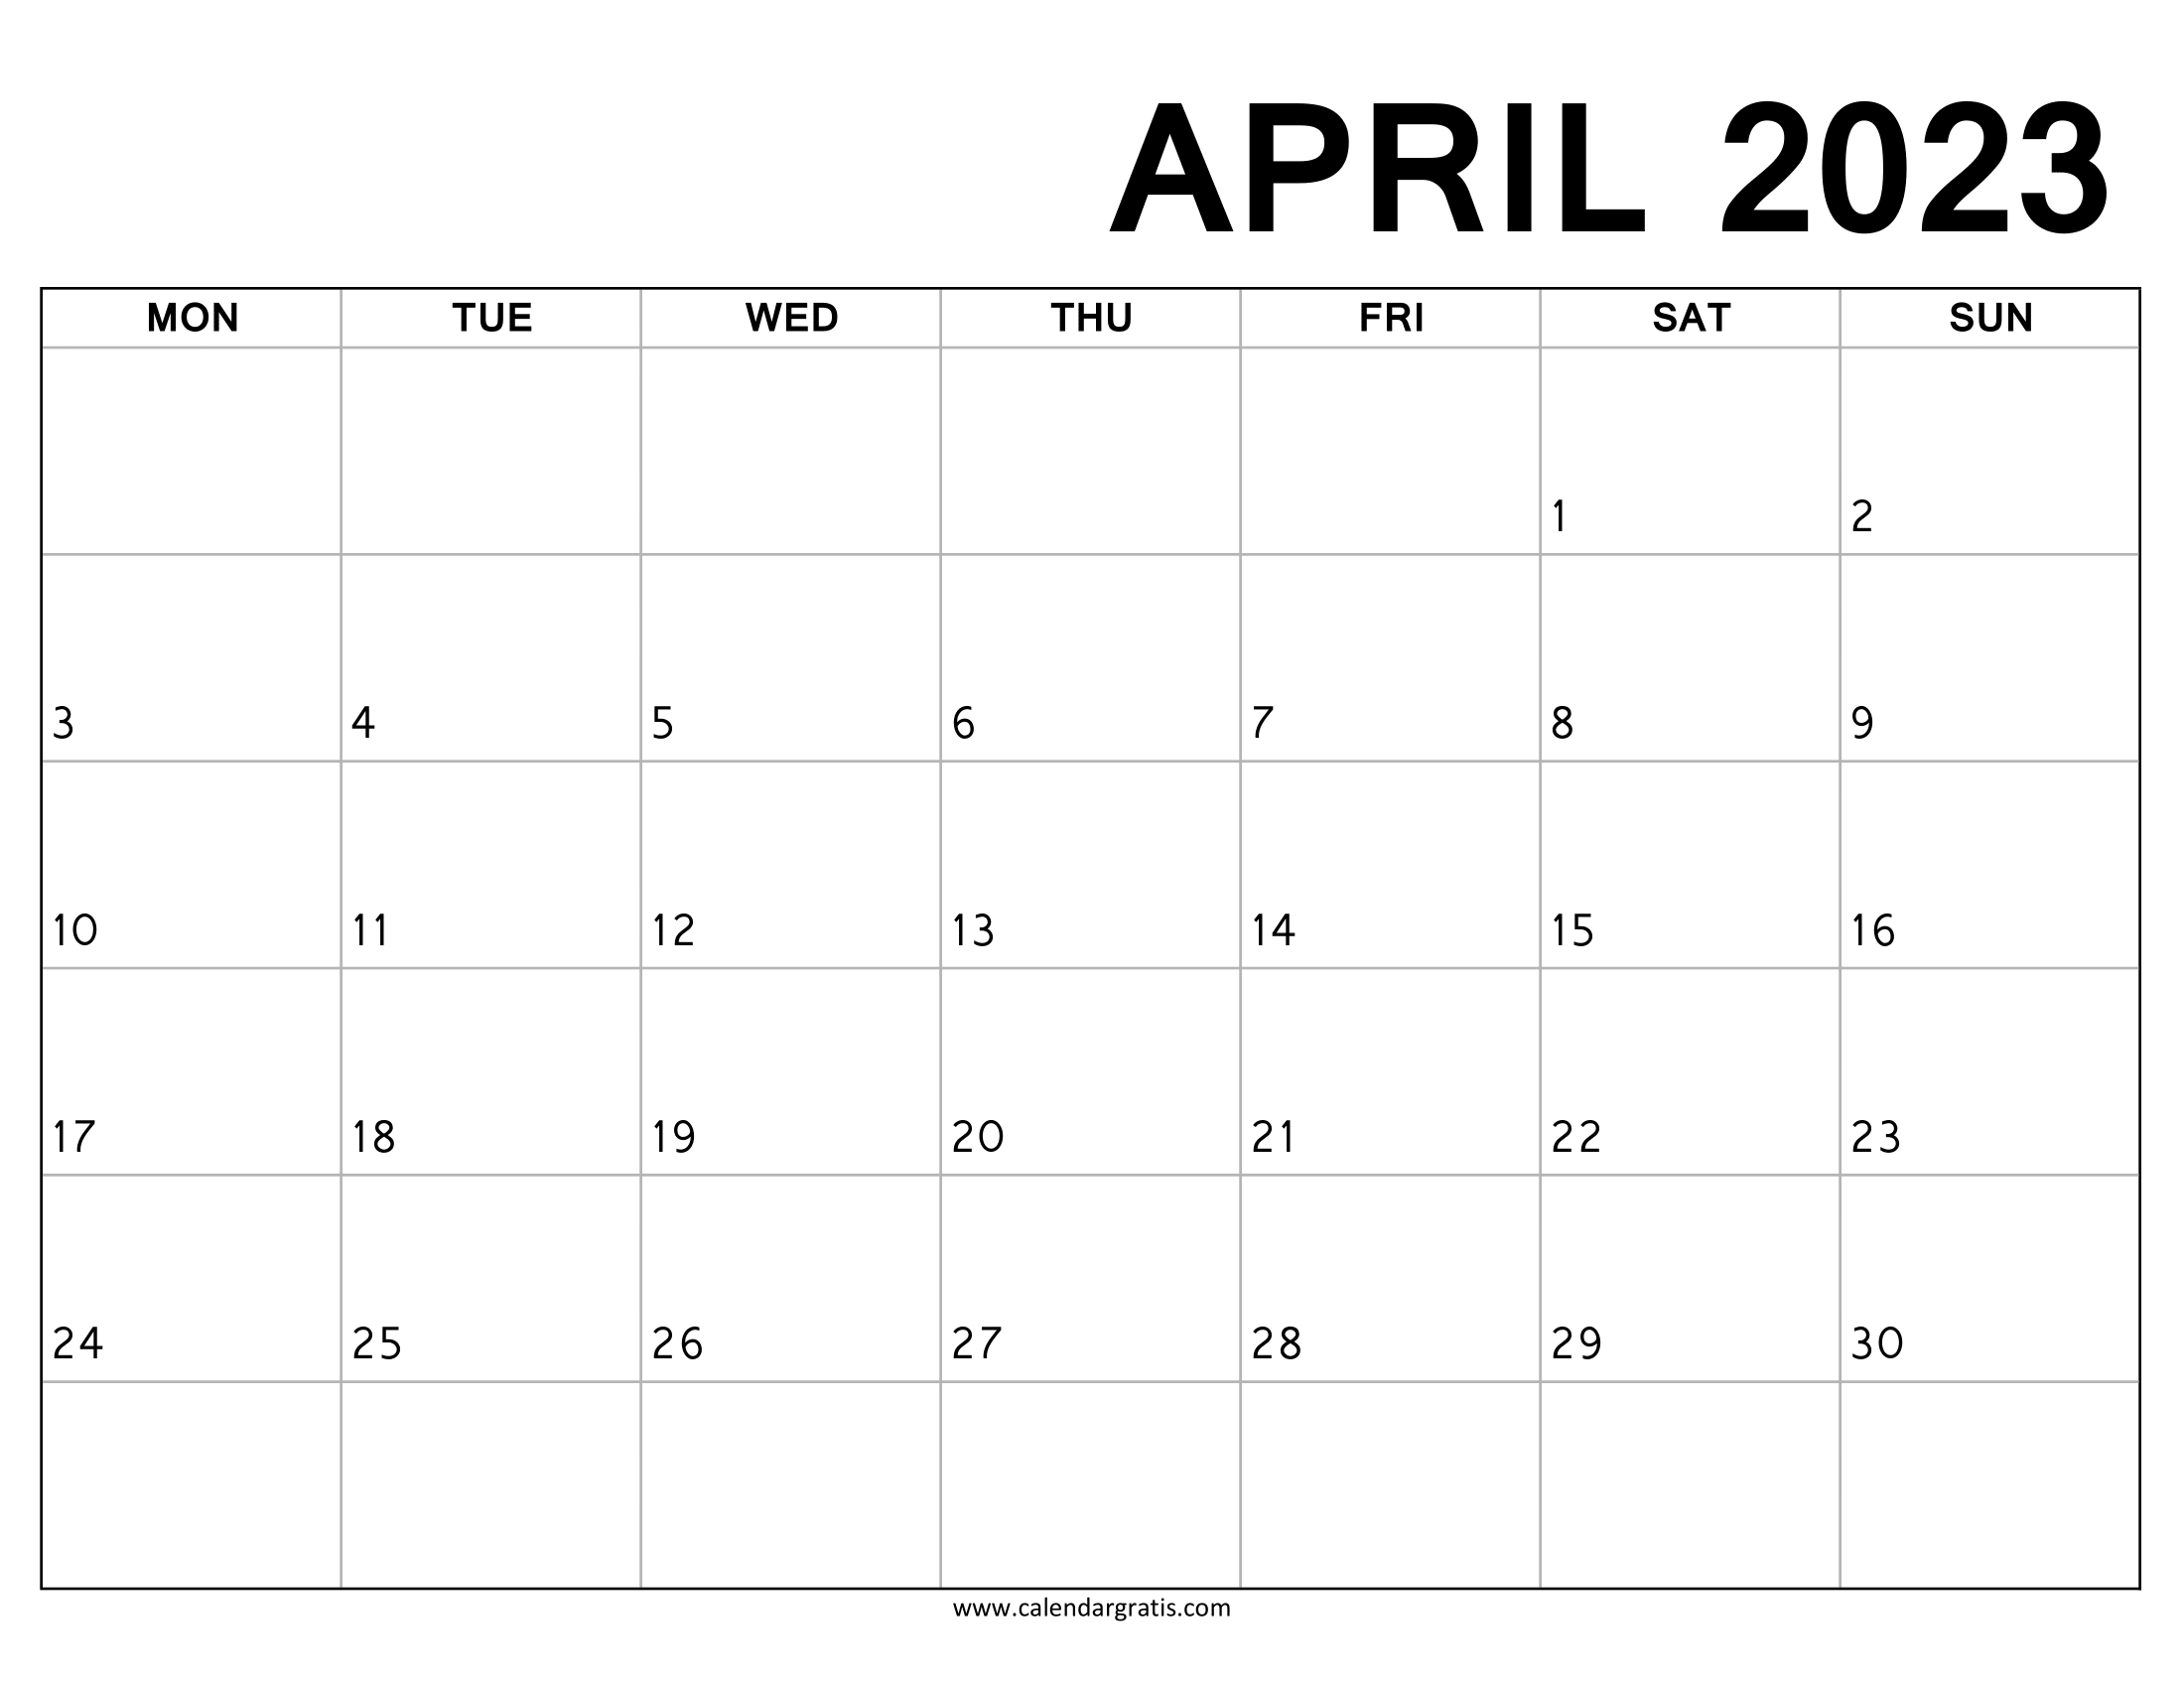 Download April 2023 Calendar Printable Monday Start, Monday to Sunday, Black and White Monthly Calendar Template.